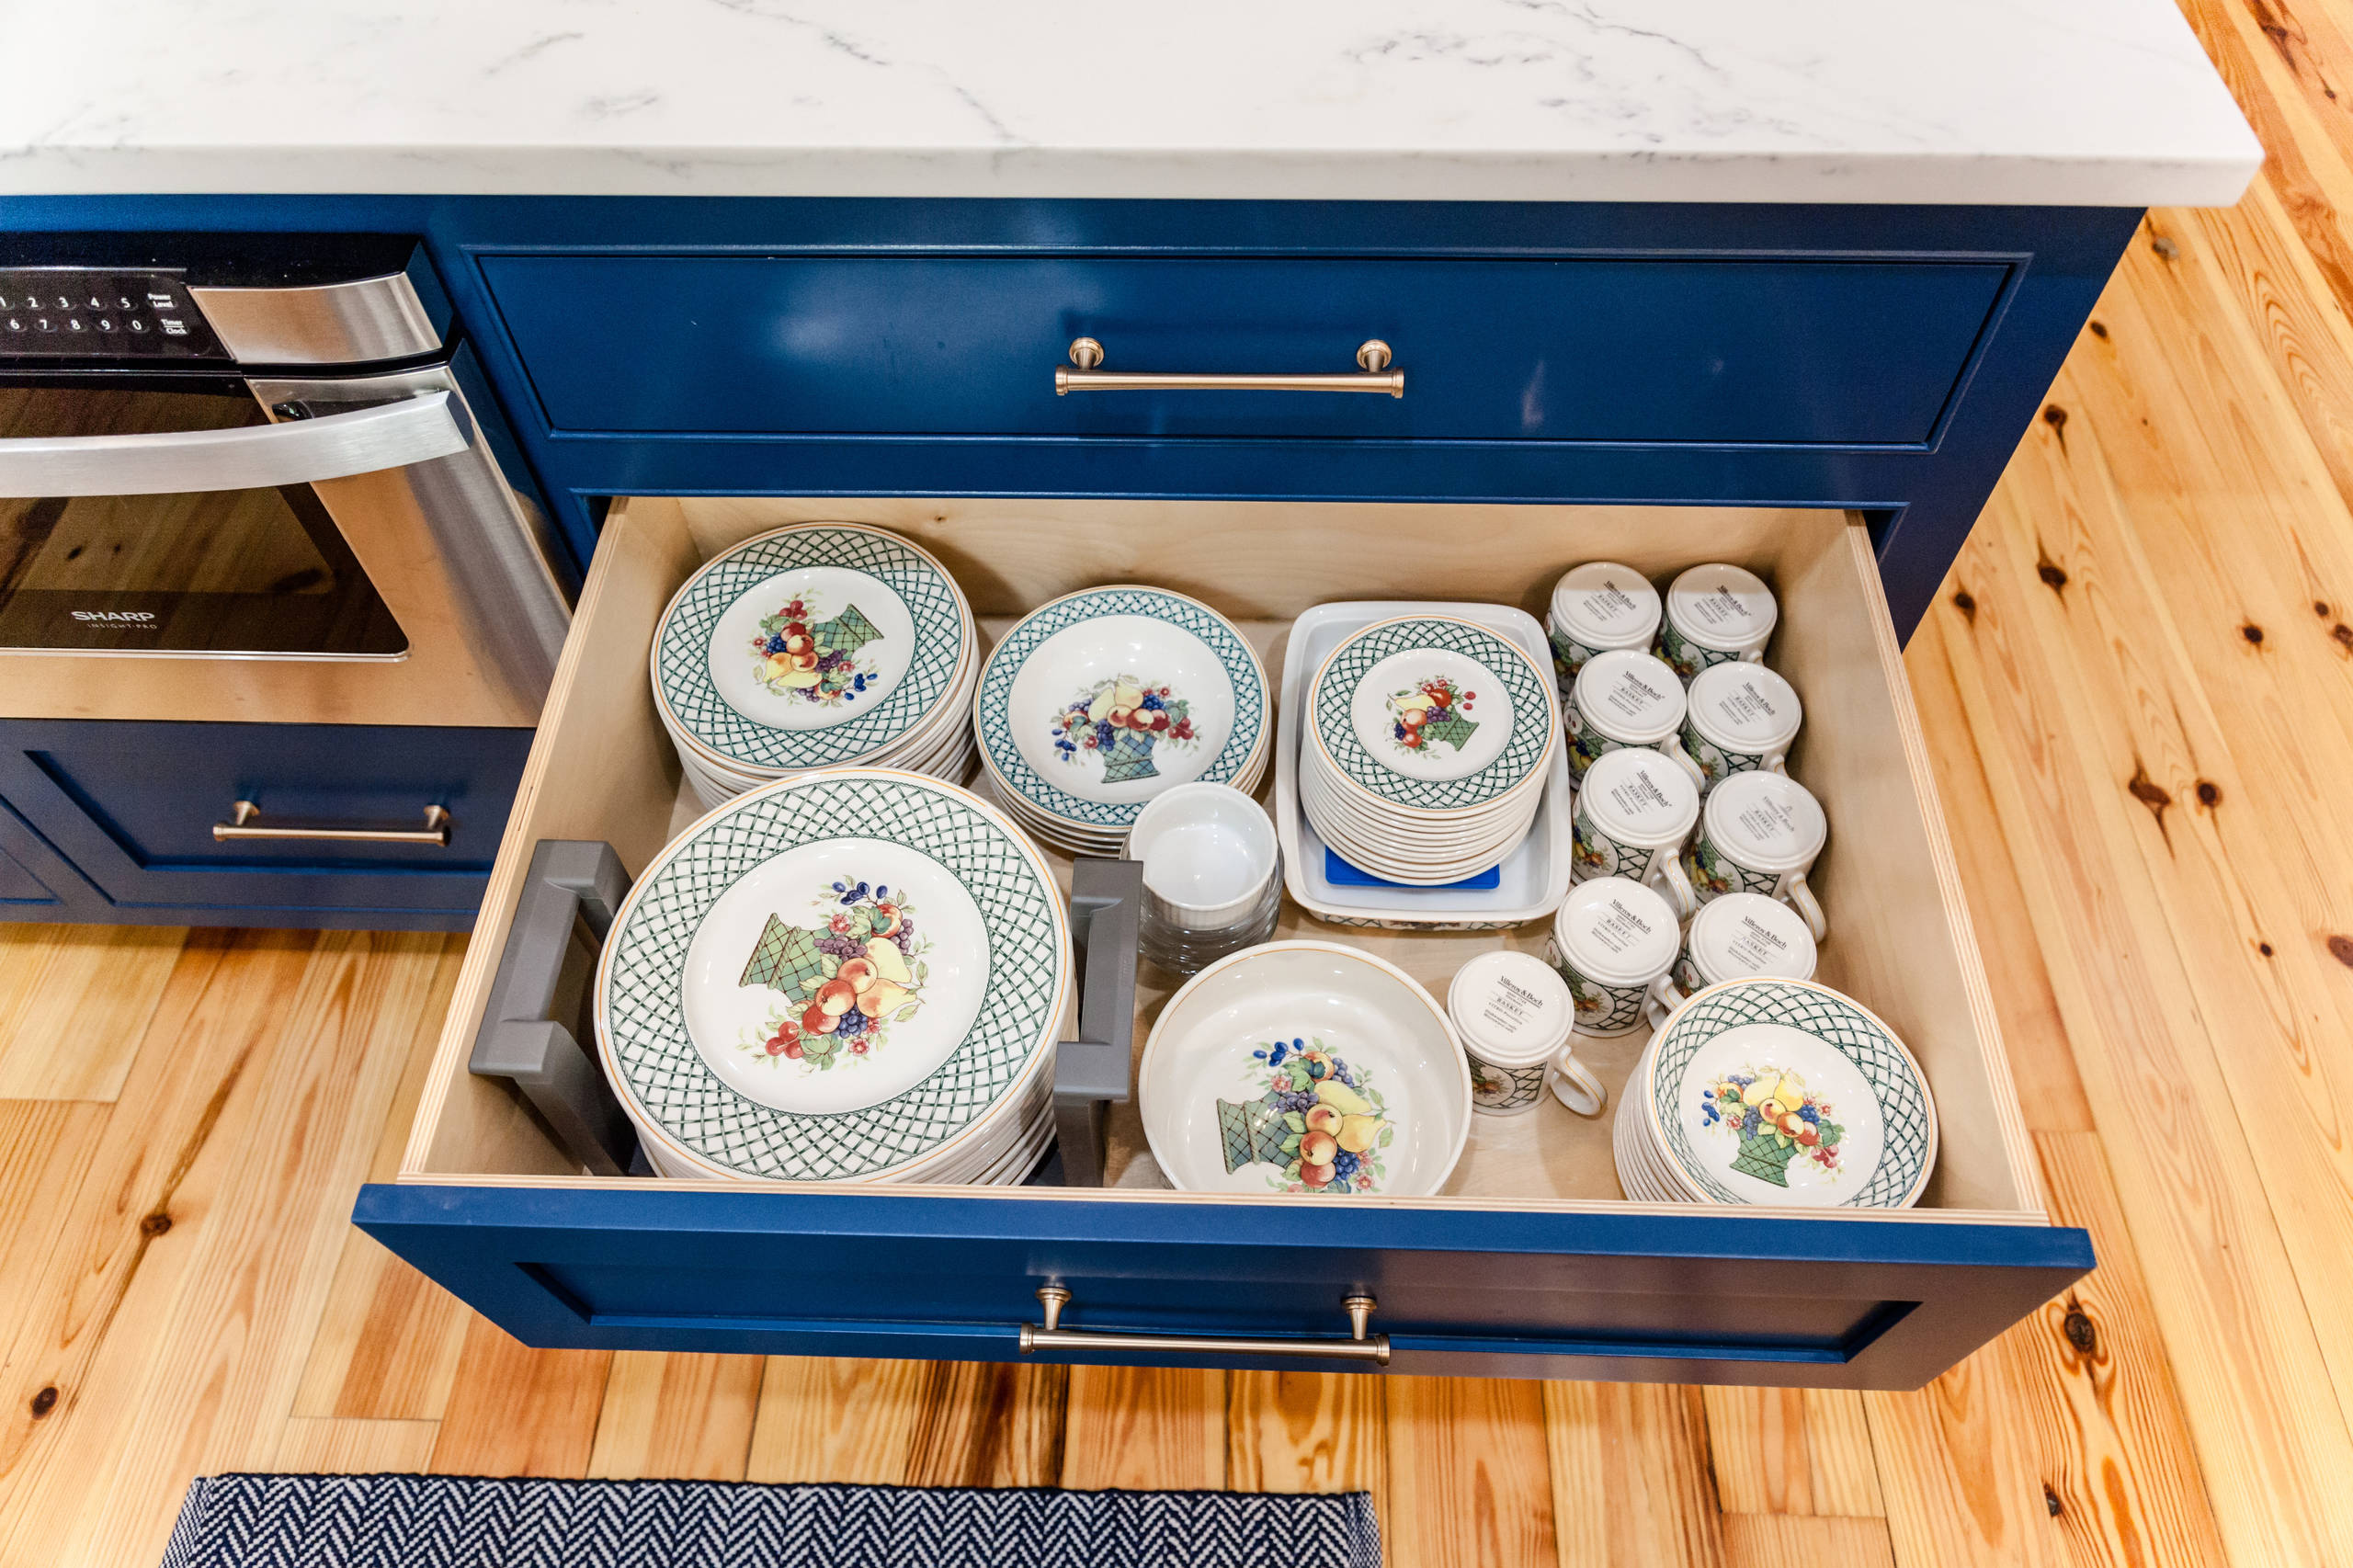 Full extension heavy duty drawers for everyday dishes